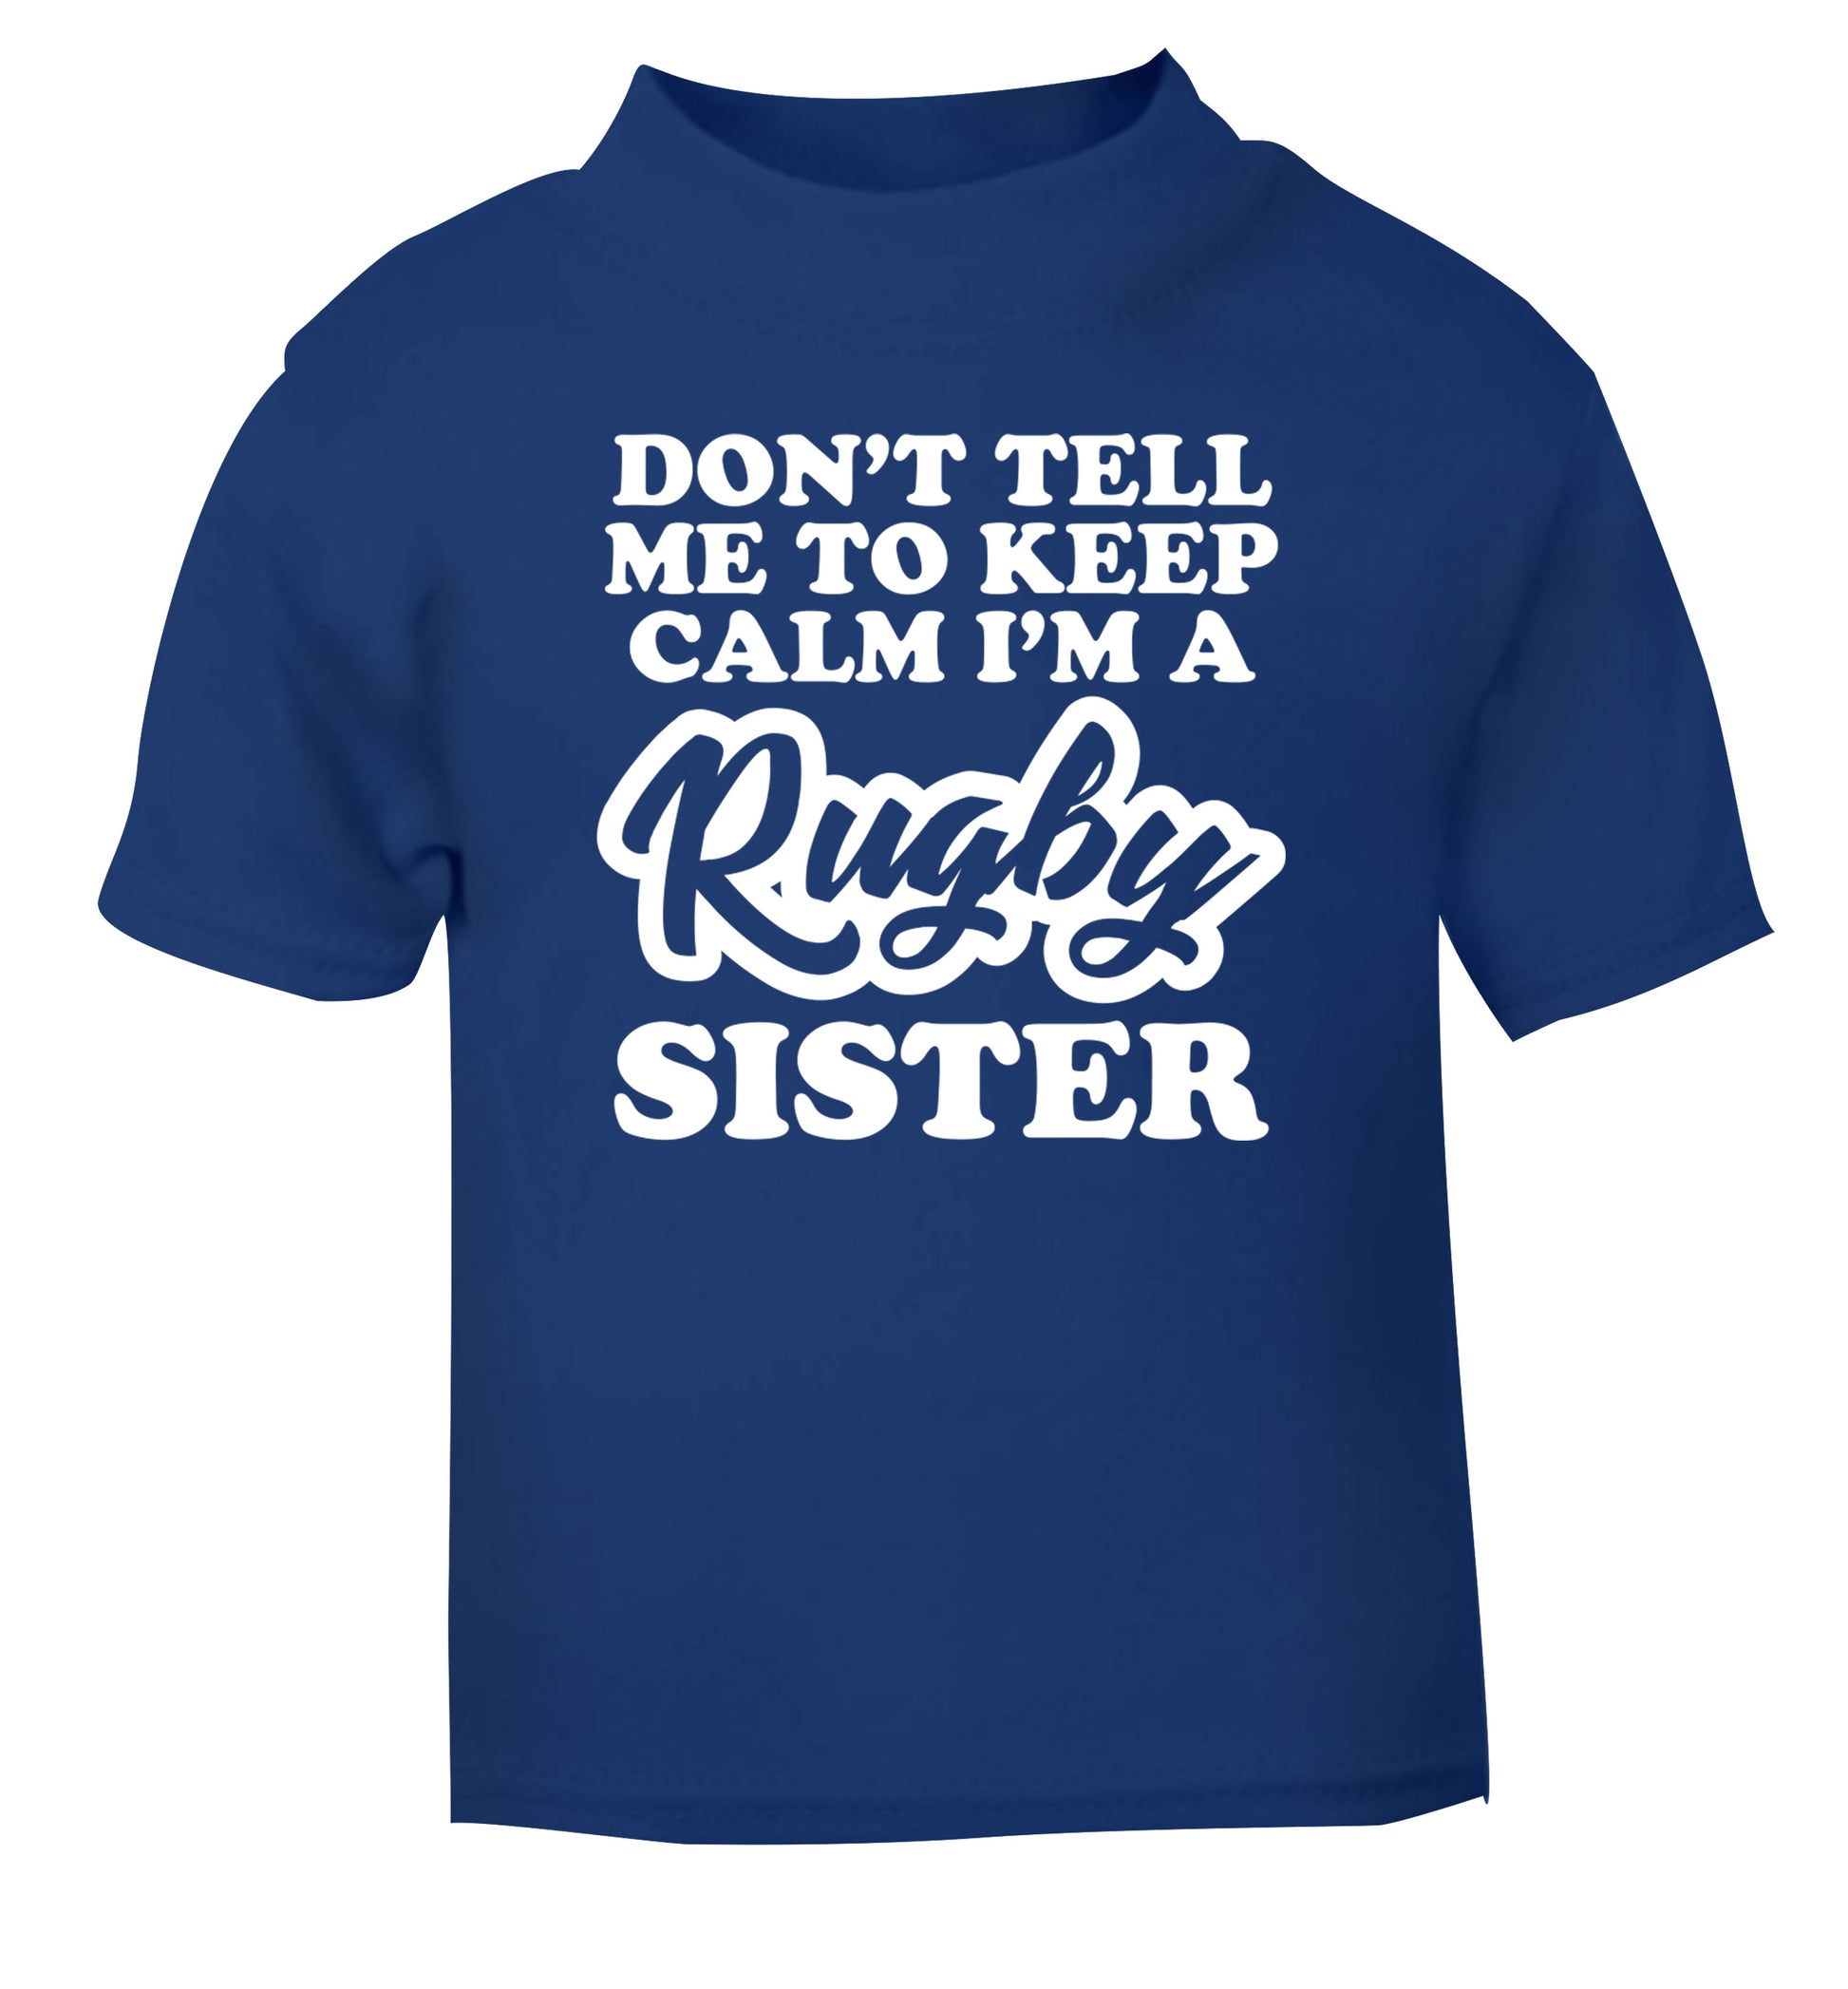 Don't tell me keep calm I'm a rugby sister blue Baby Toddler Tshirt 2 Years